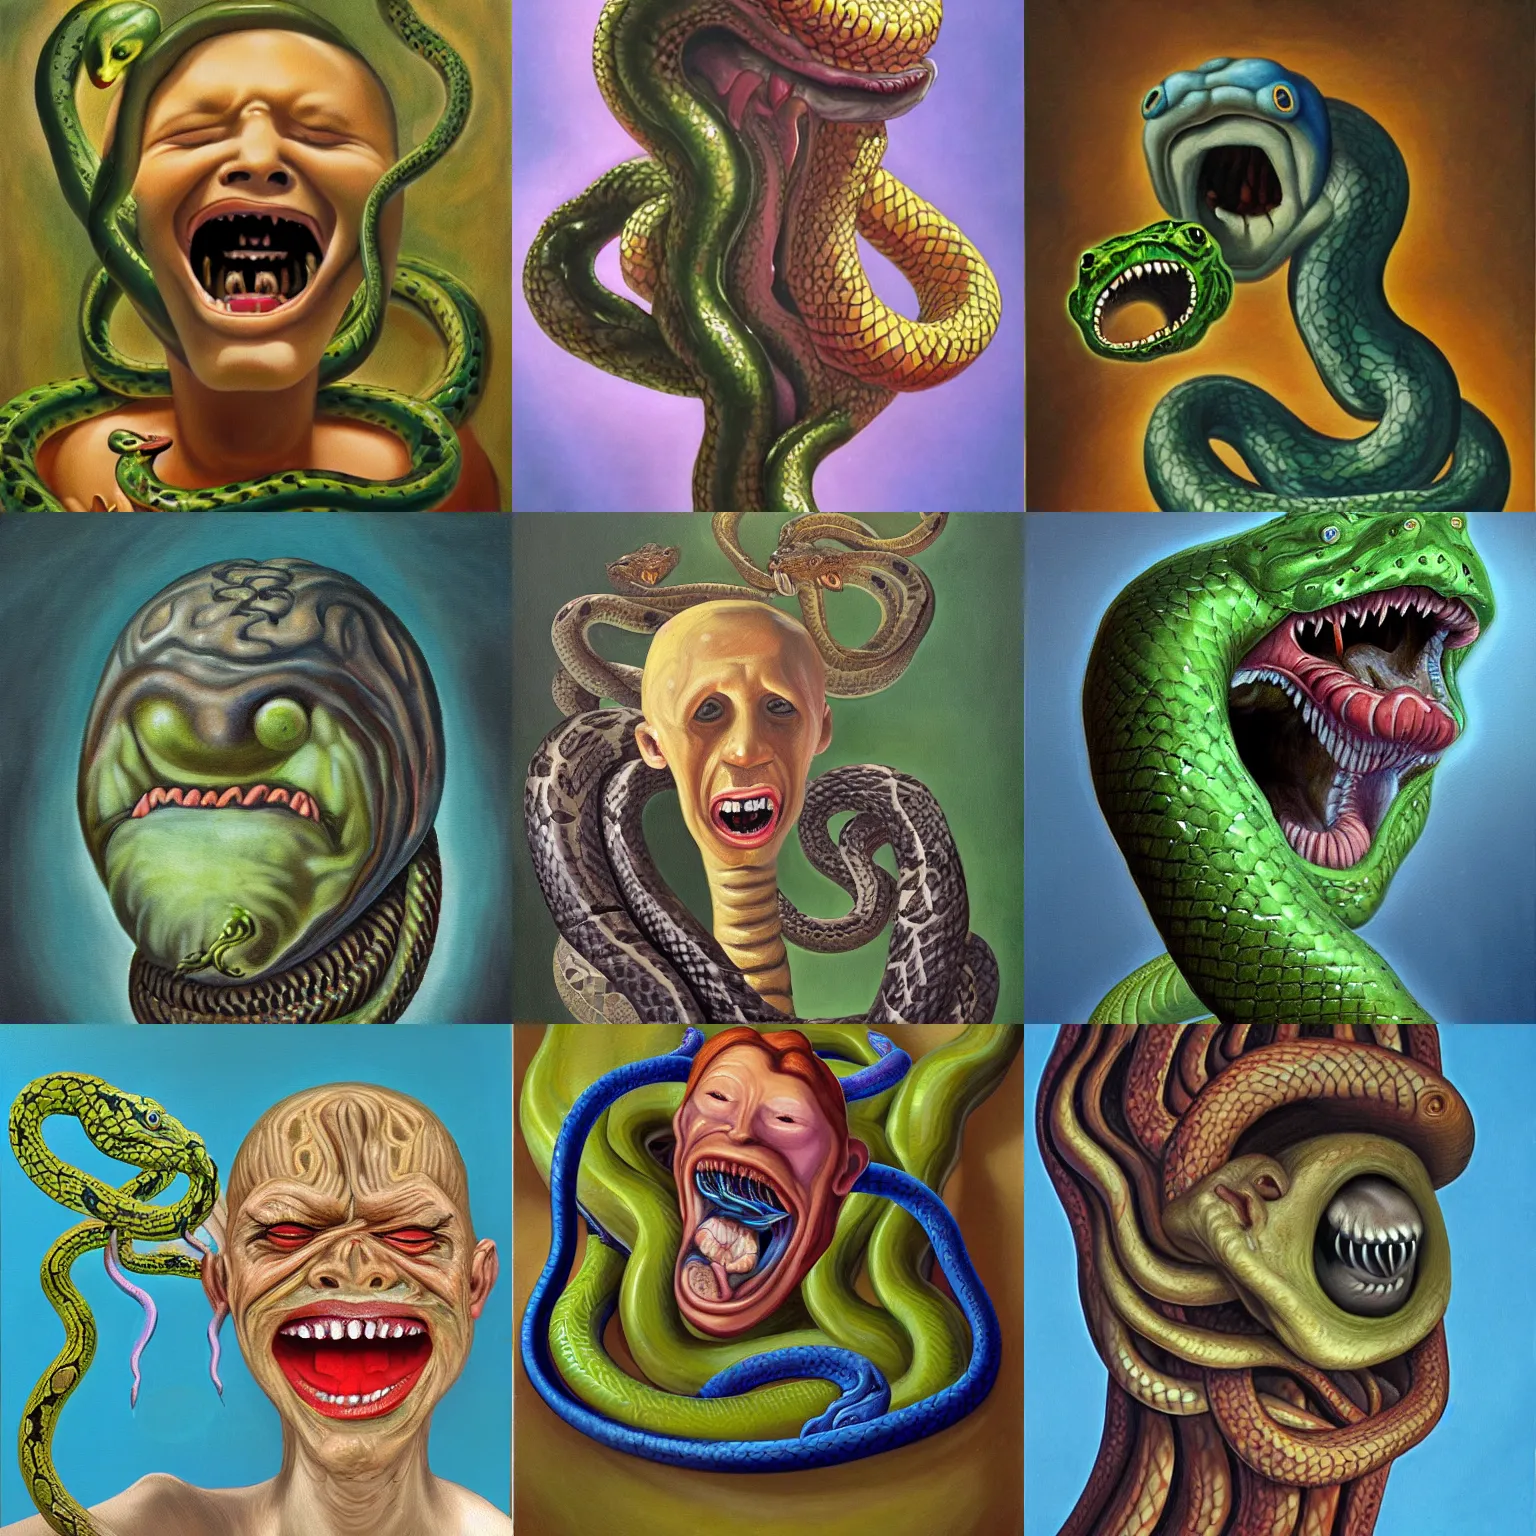 Prompt: A disembodied head screaming with snakes slithering out of its mouth, oil painting, surrealism style